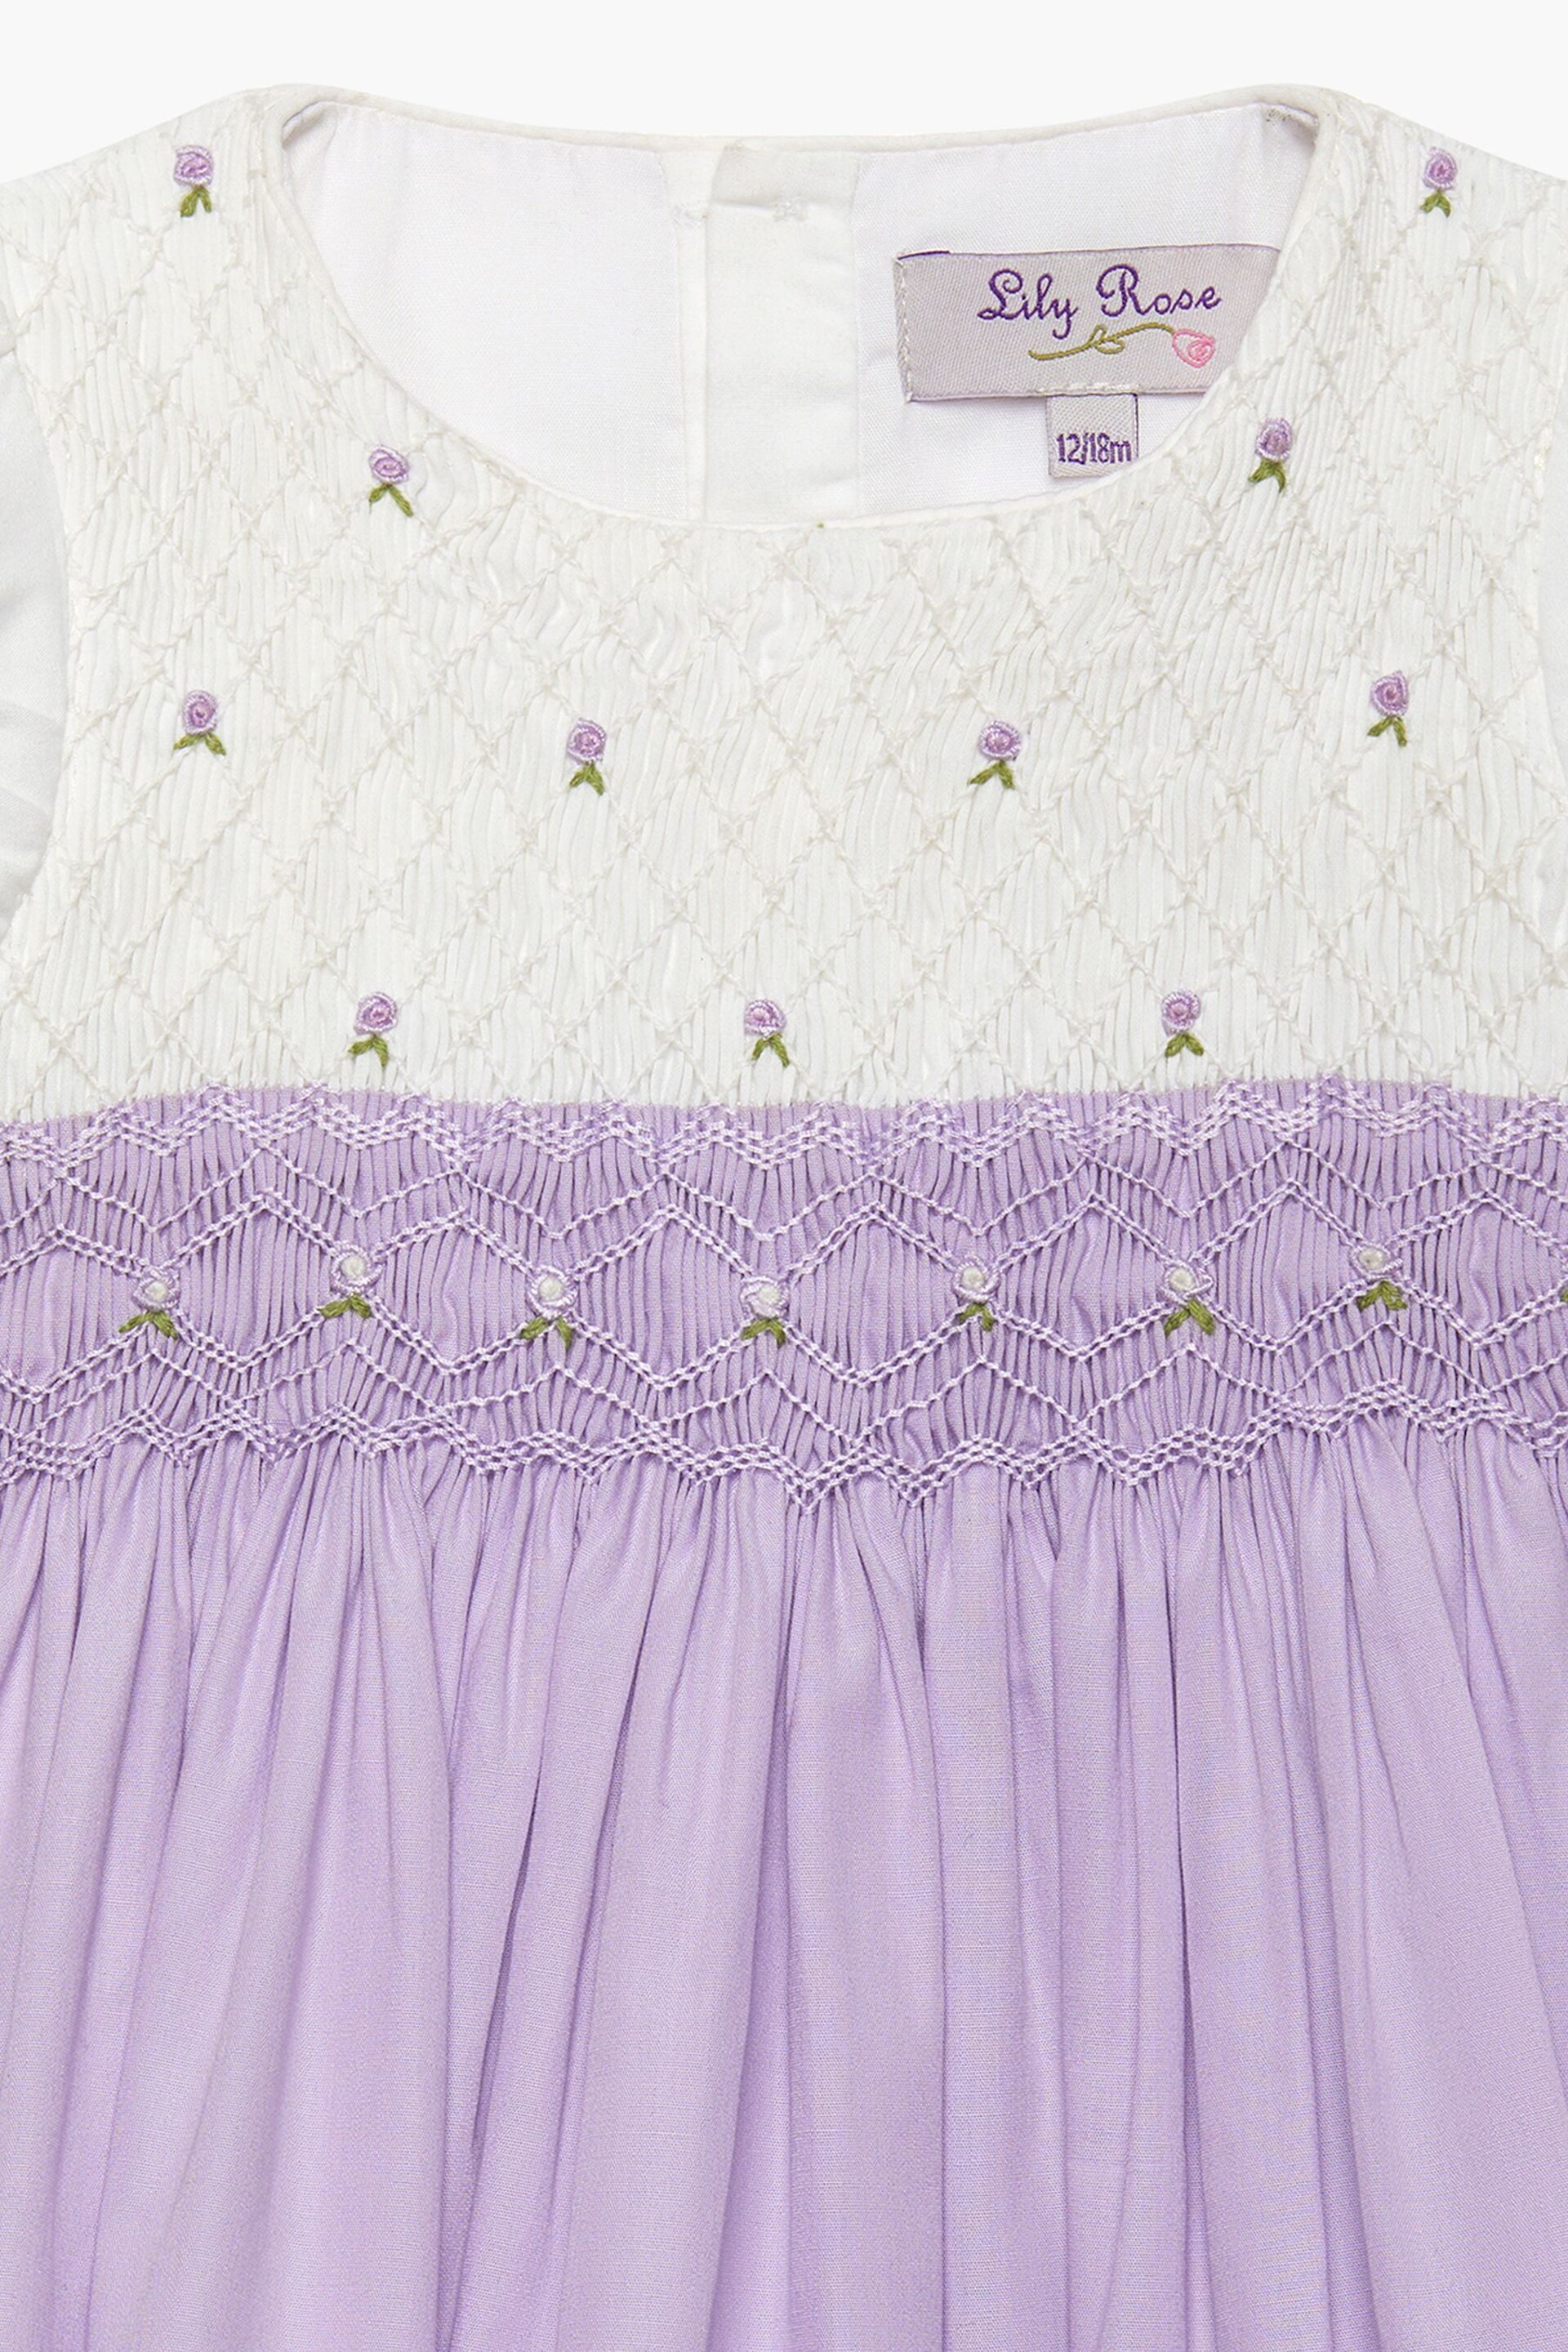 Trotters London Purple Little Rose Hand Smocked Cotton Dress - Image 4 of 4